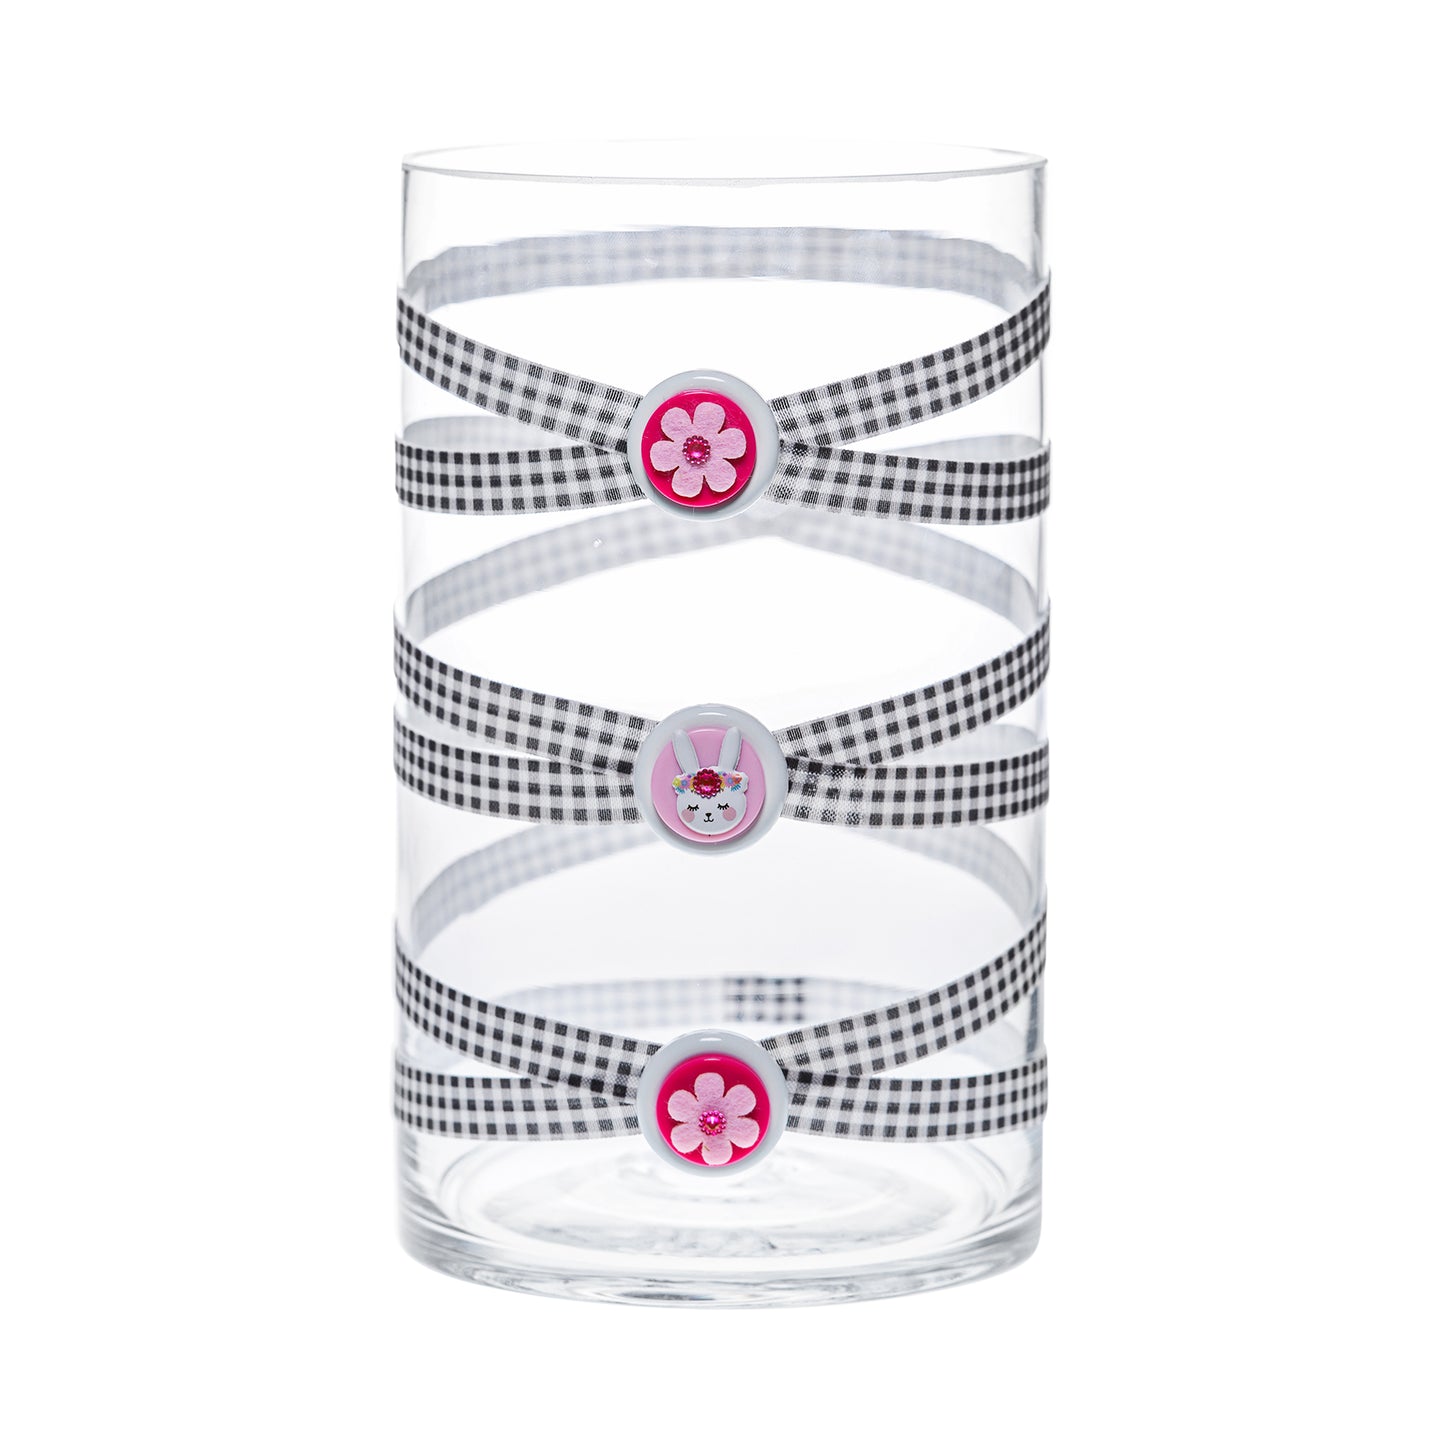 Front of Glass Wrappings 6" x 10" cylinder wrapped in black & white check elastic, decorated with 2 pink flowers and jeweled bunny.